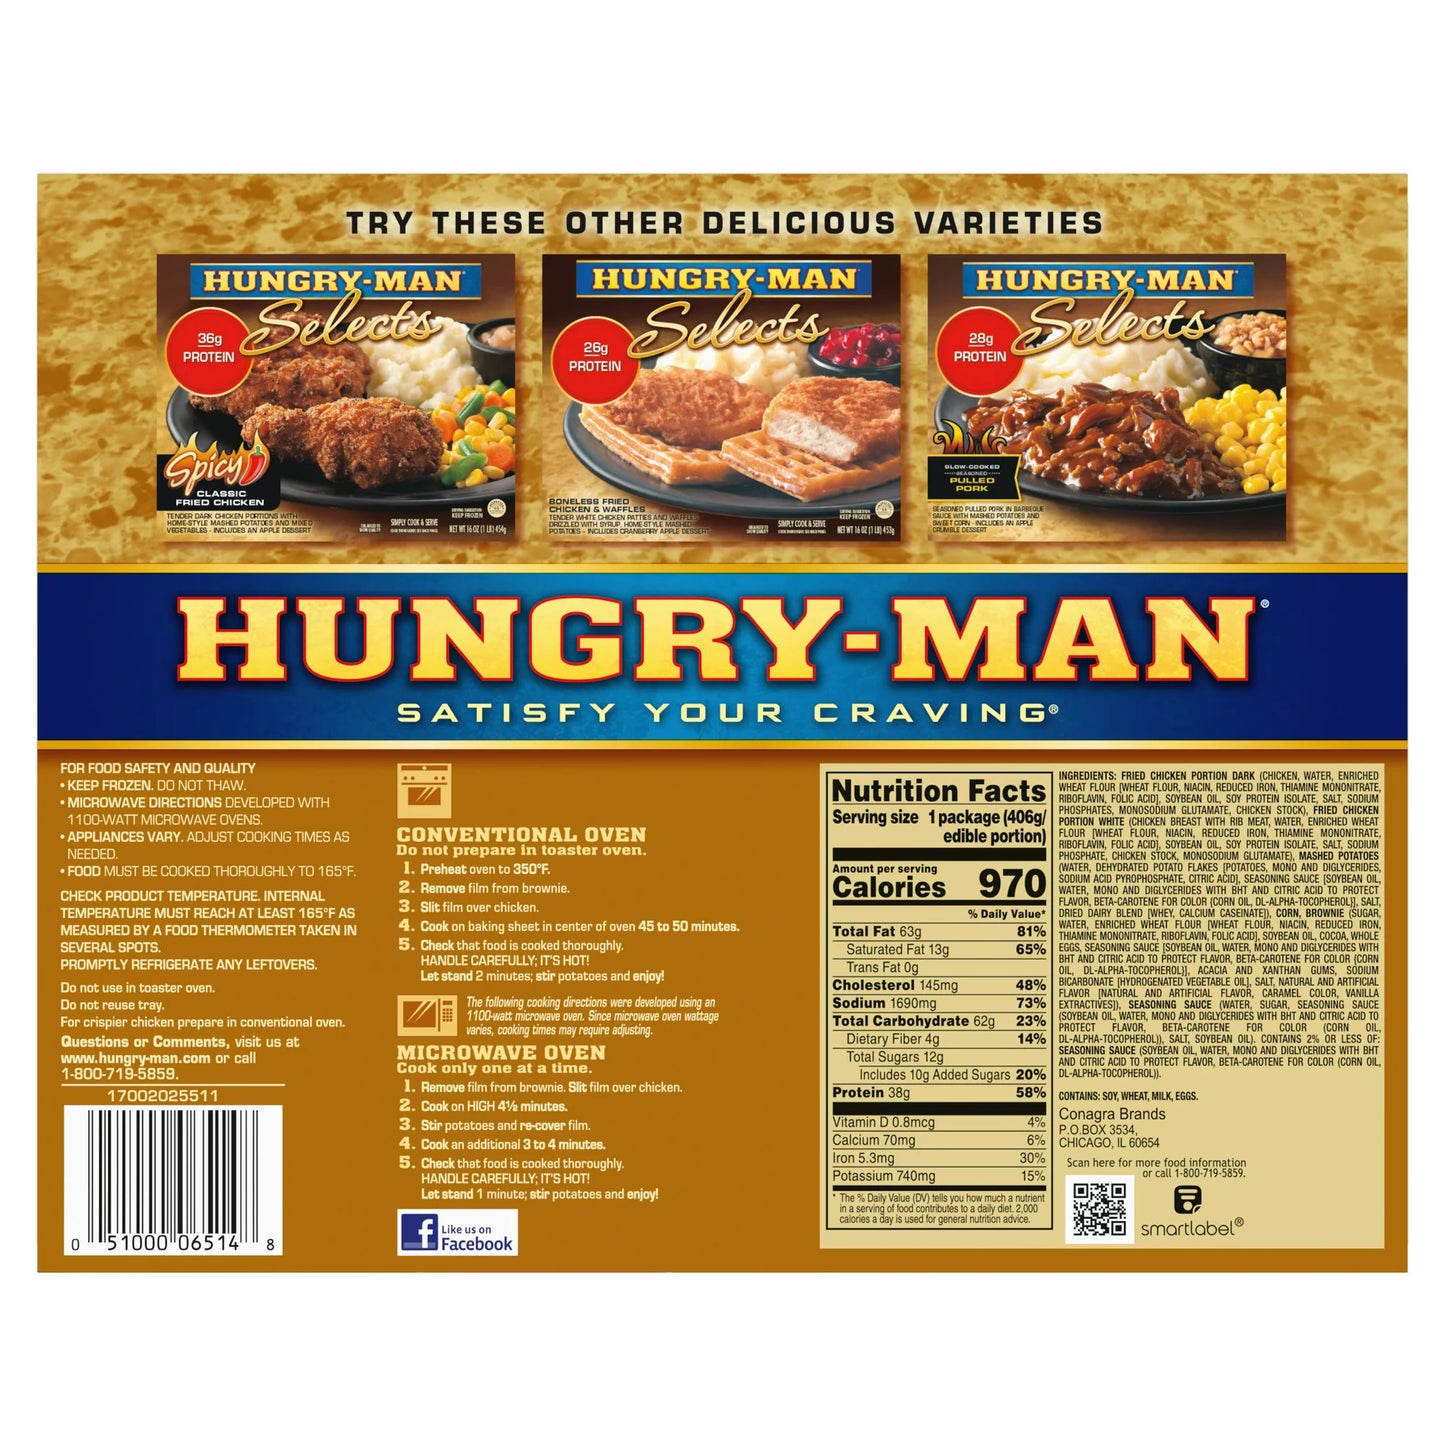 Hungry Man Selects Classic Fried Chicken Frozen Meal, 16 oz, -- 8 count